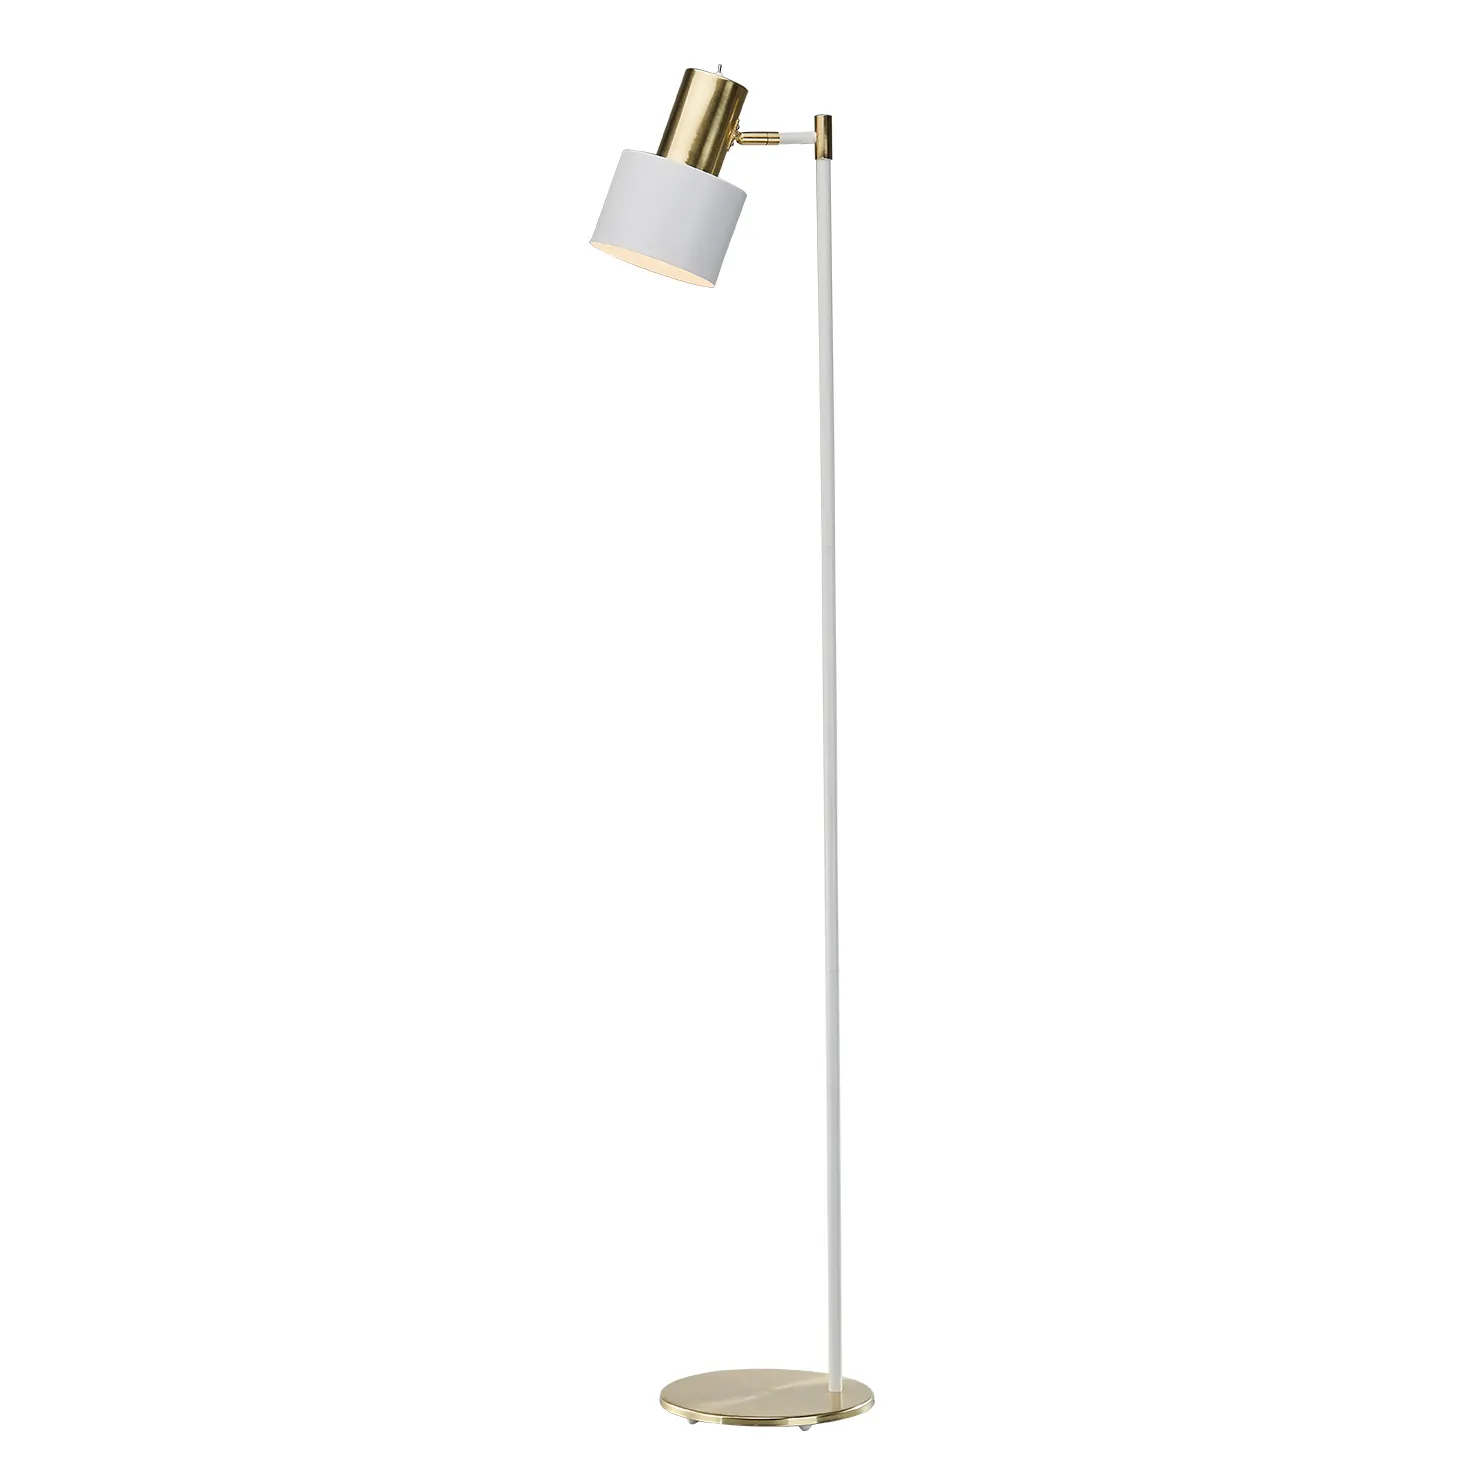 Modern indoor E27 metal floor lamp with switch for incandescent or LED bulb